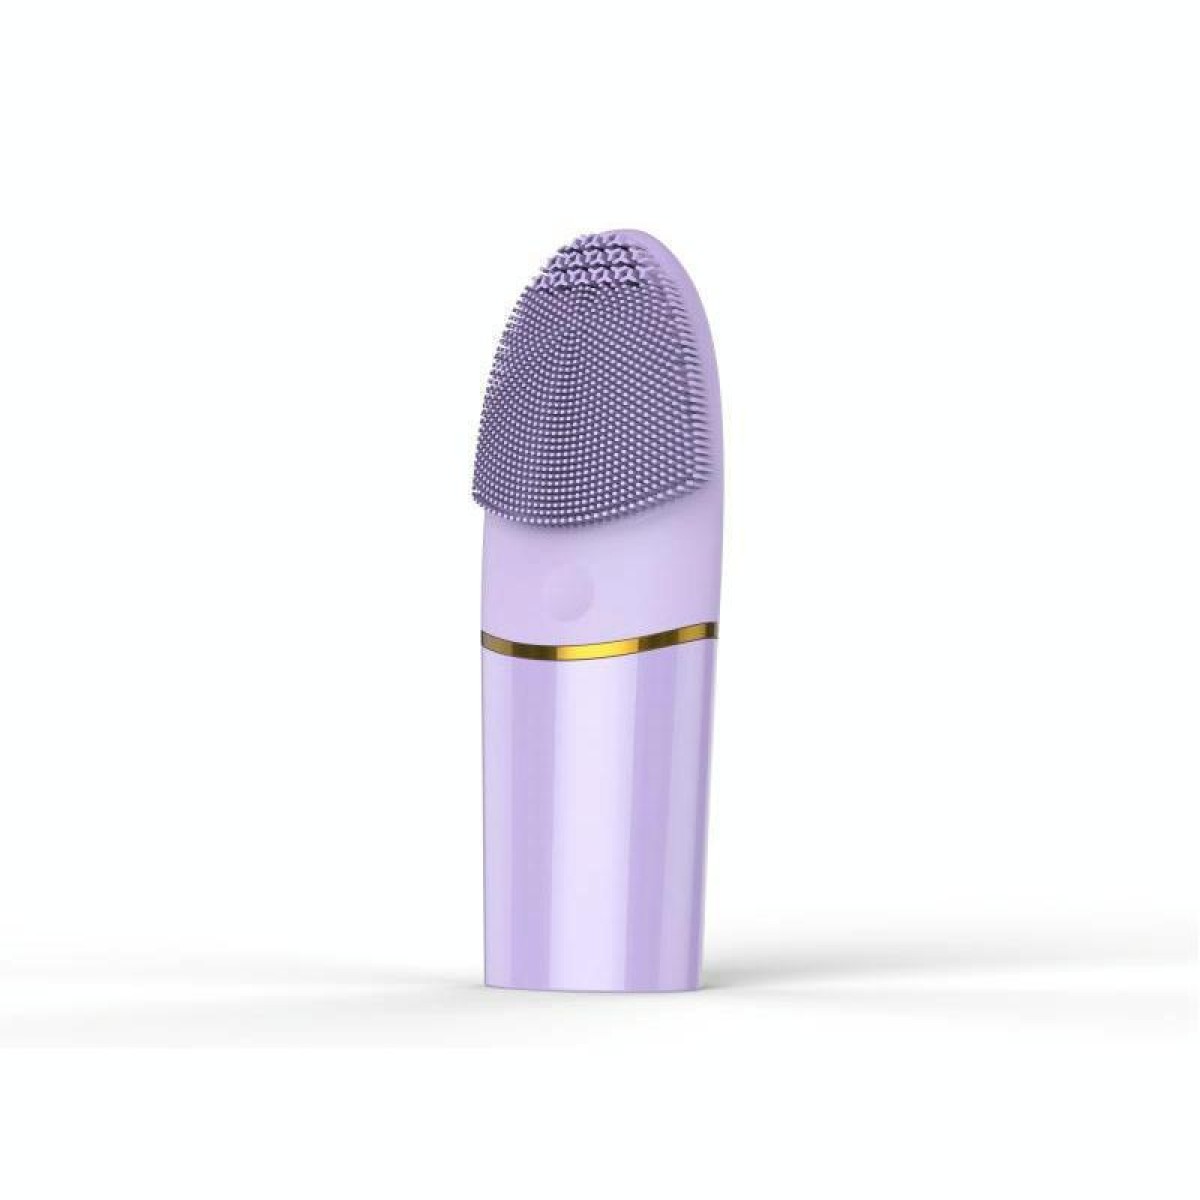 AM--1101 Silicone Handheld Cleansing Apparatus Waterproof Portable Cleansing Brush Massager Pore Cleaner(Purple)